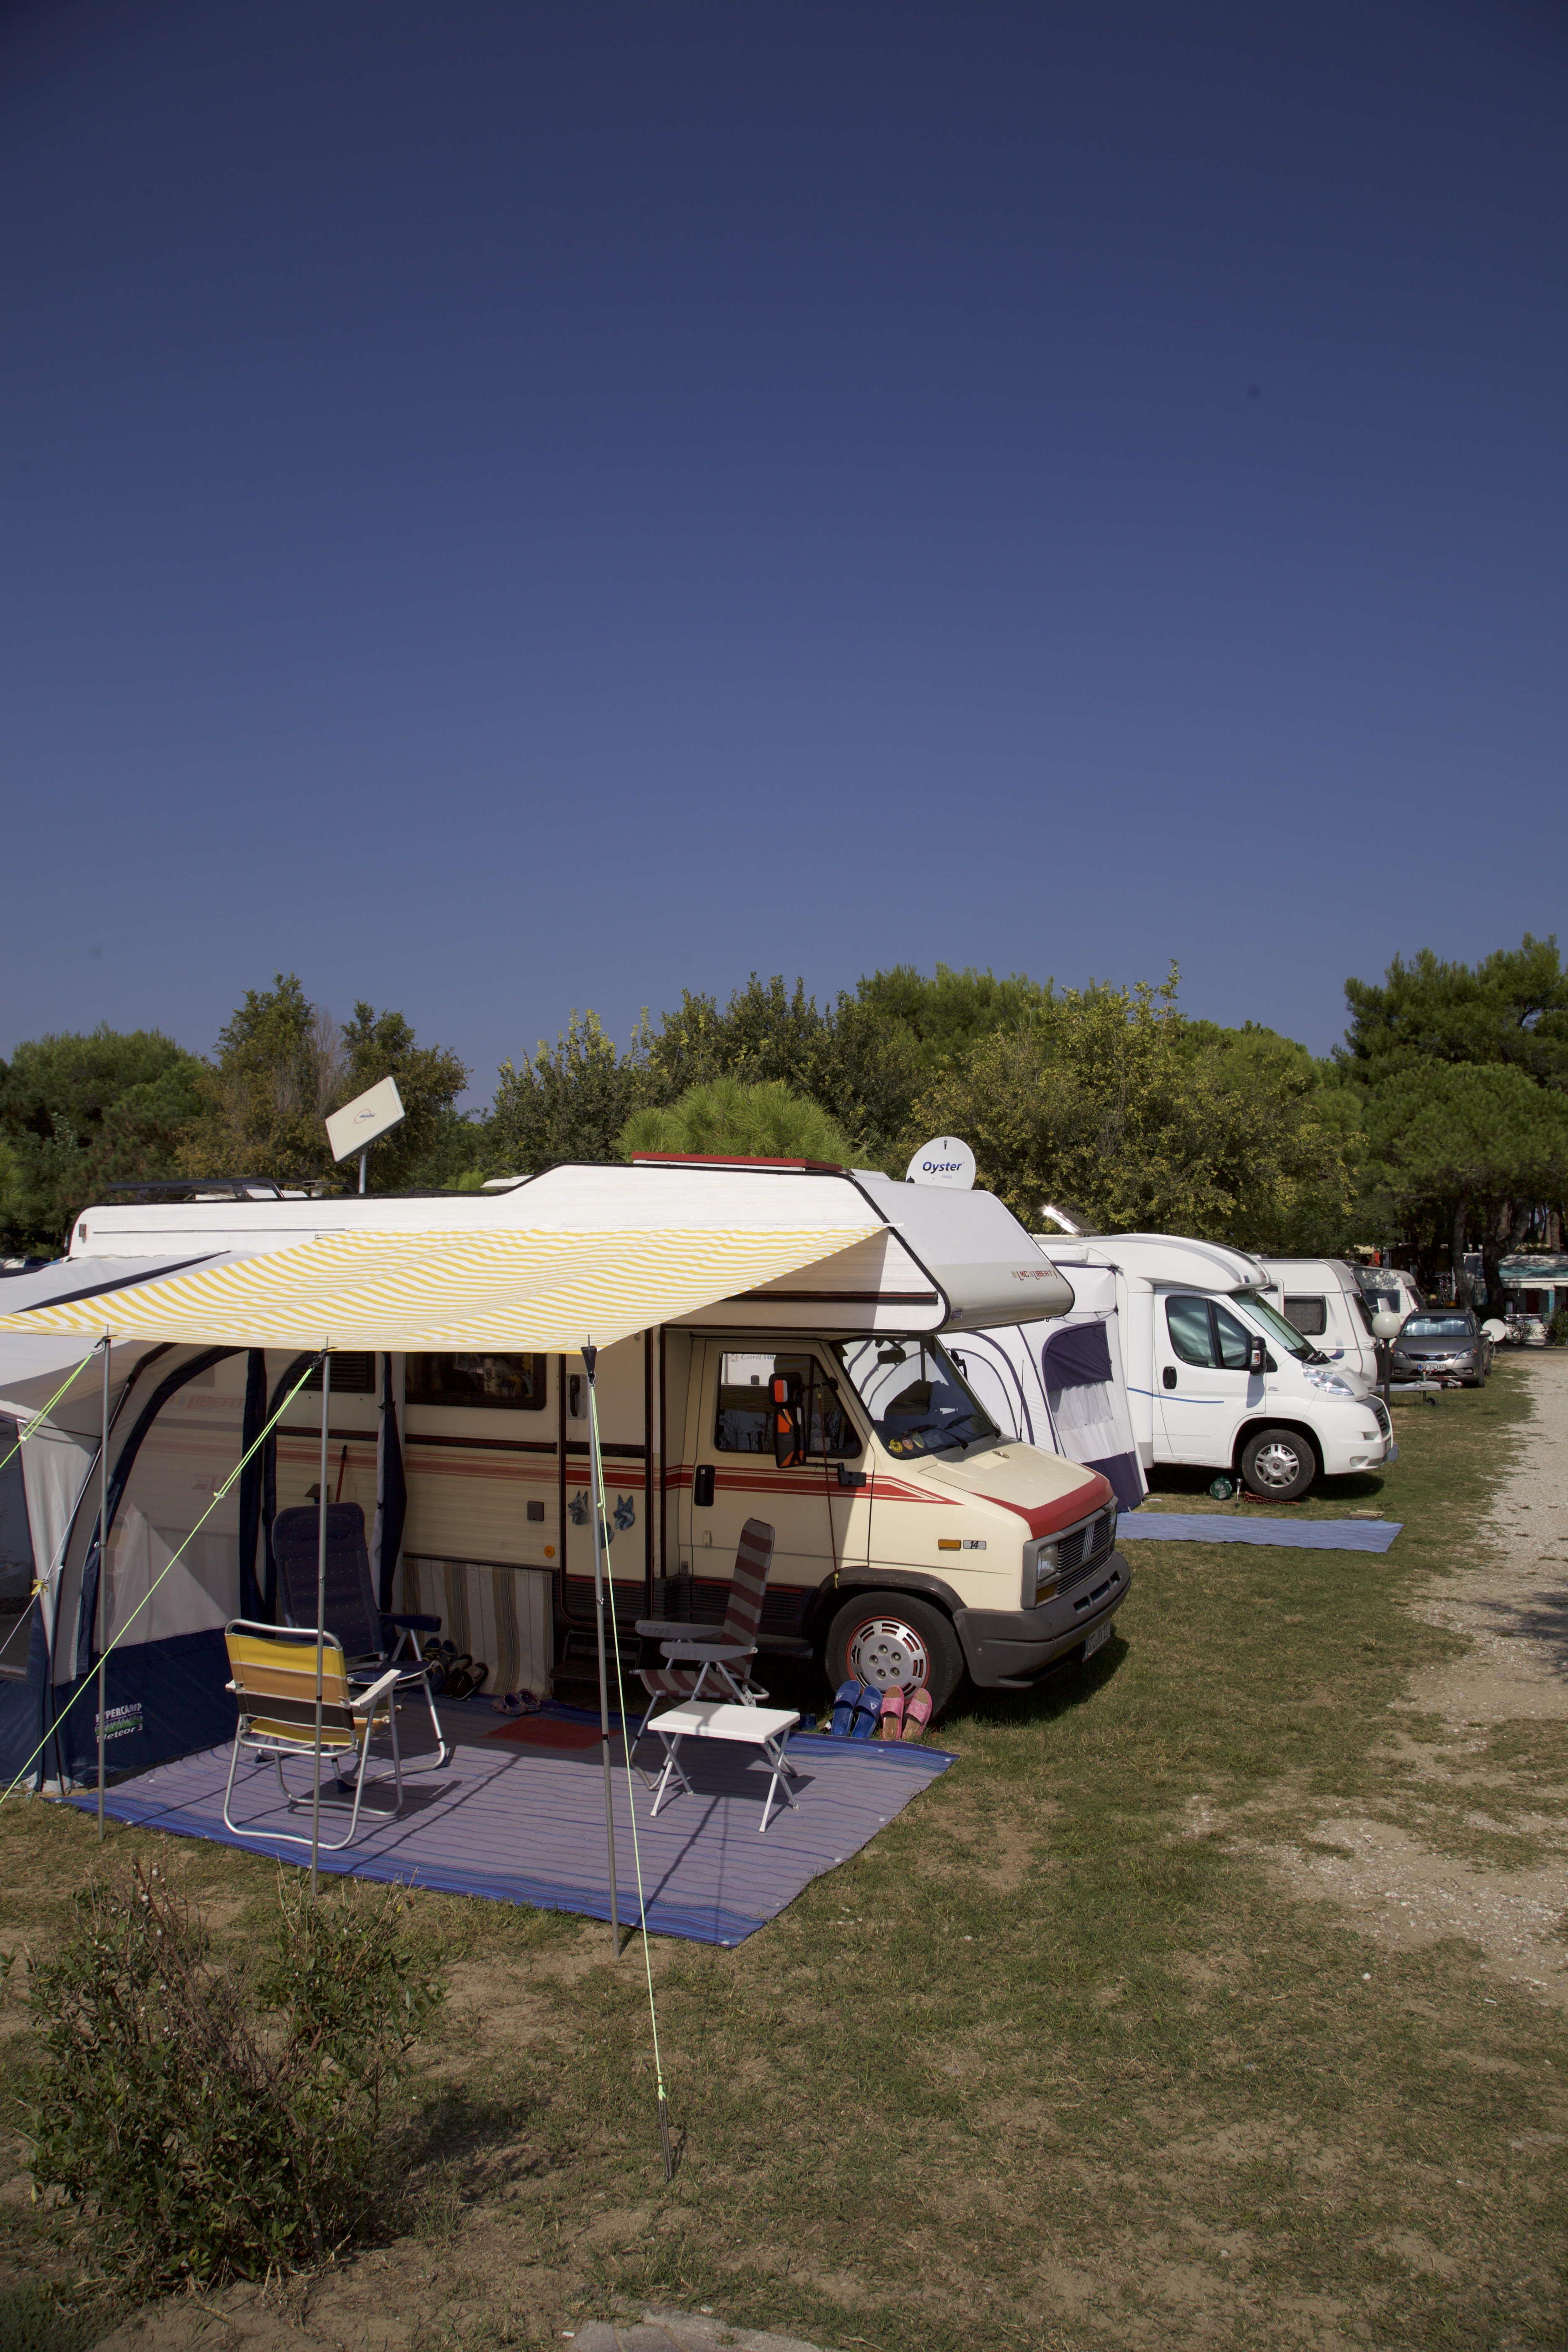 Emplacement - Emplacement Type A - Camping village Cavallino